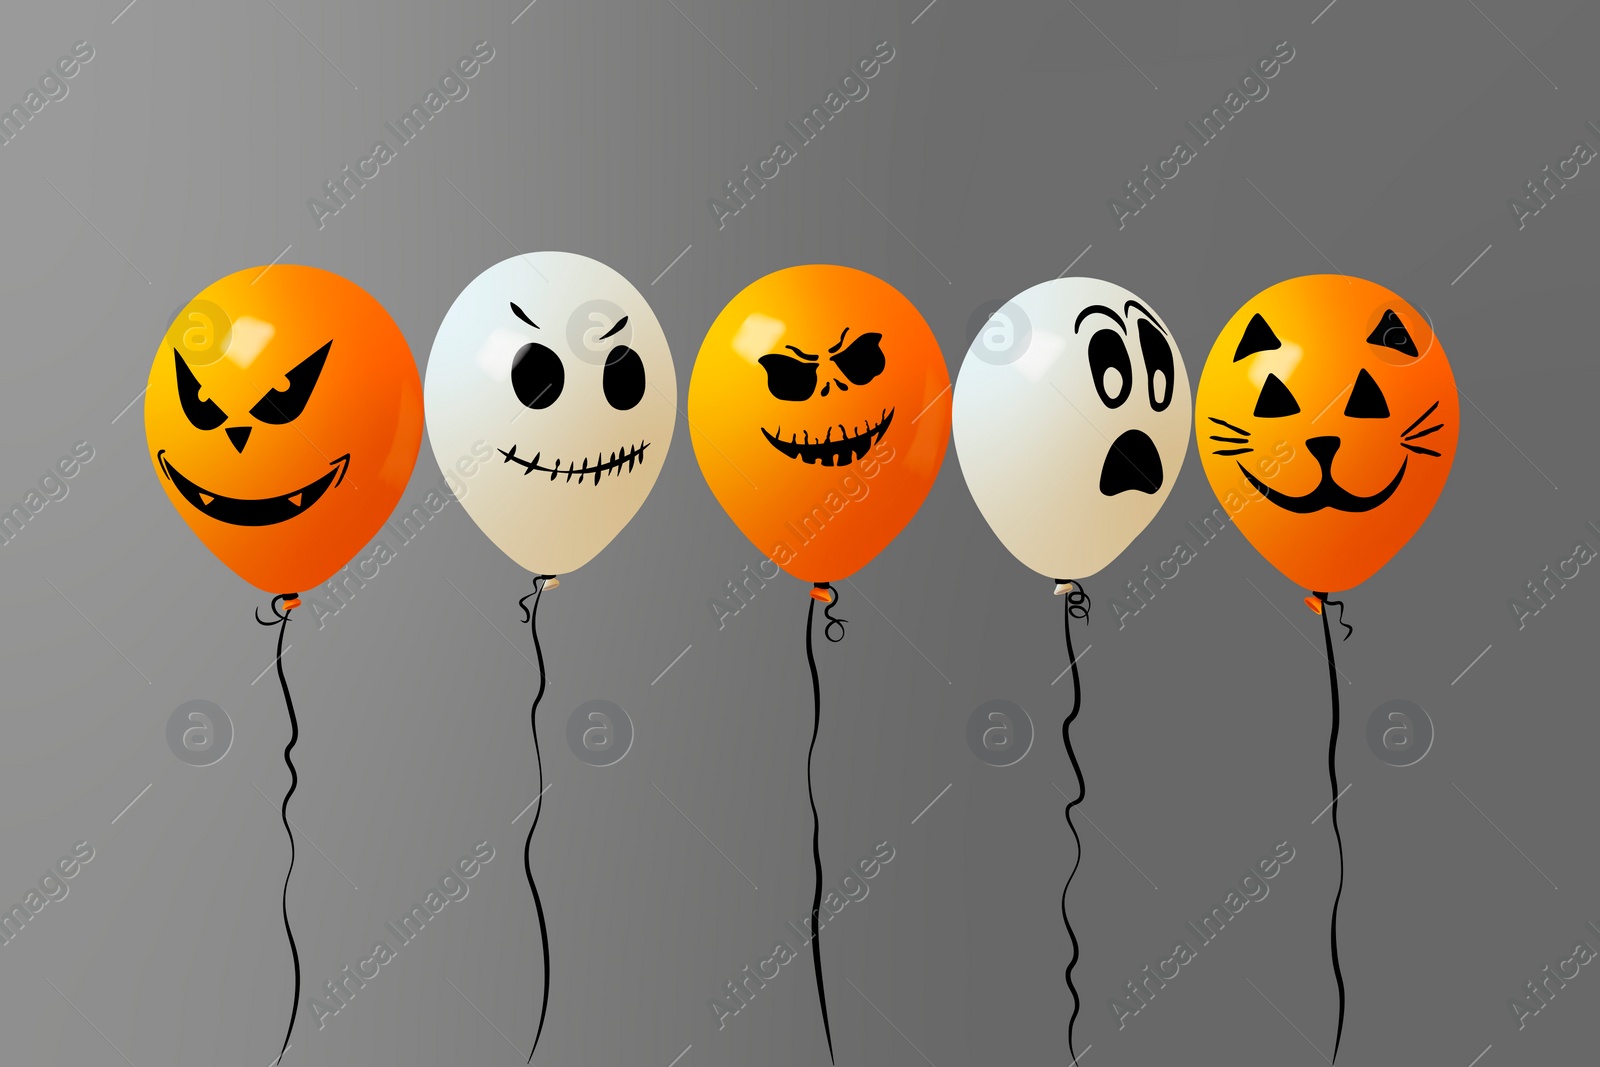 Image of Color balloons for Halloween party on gray background